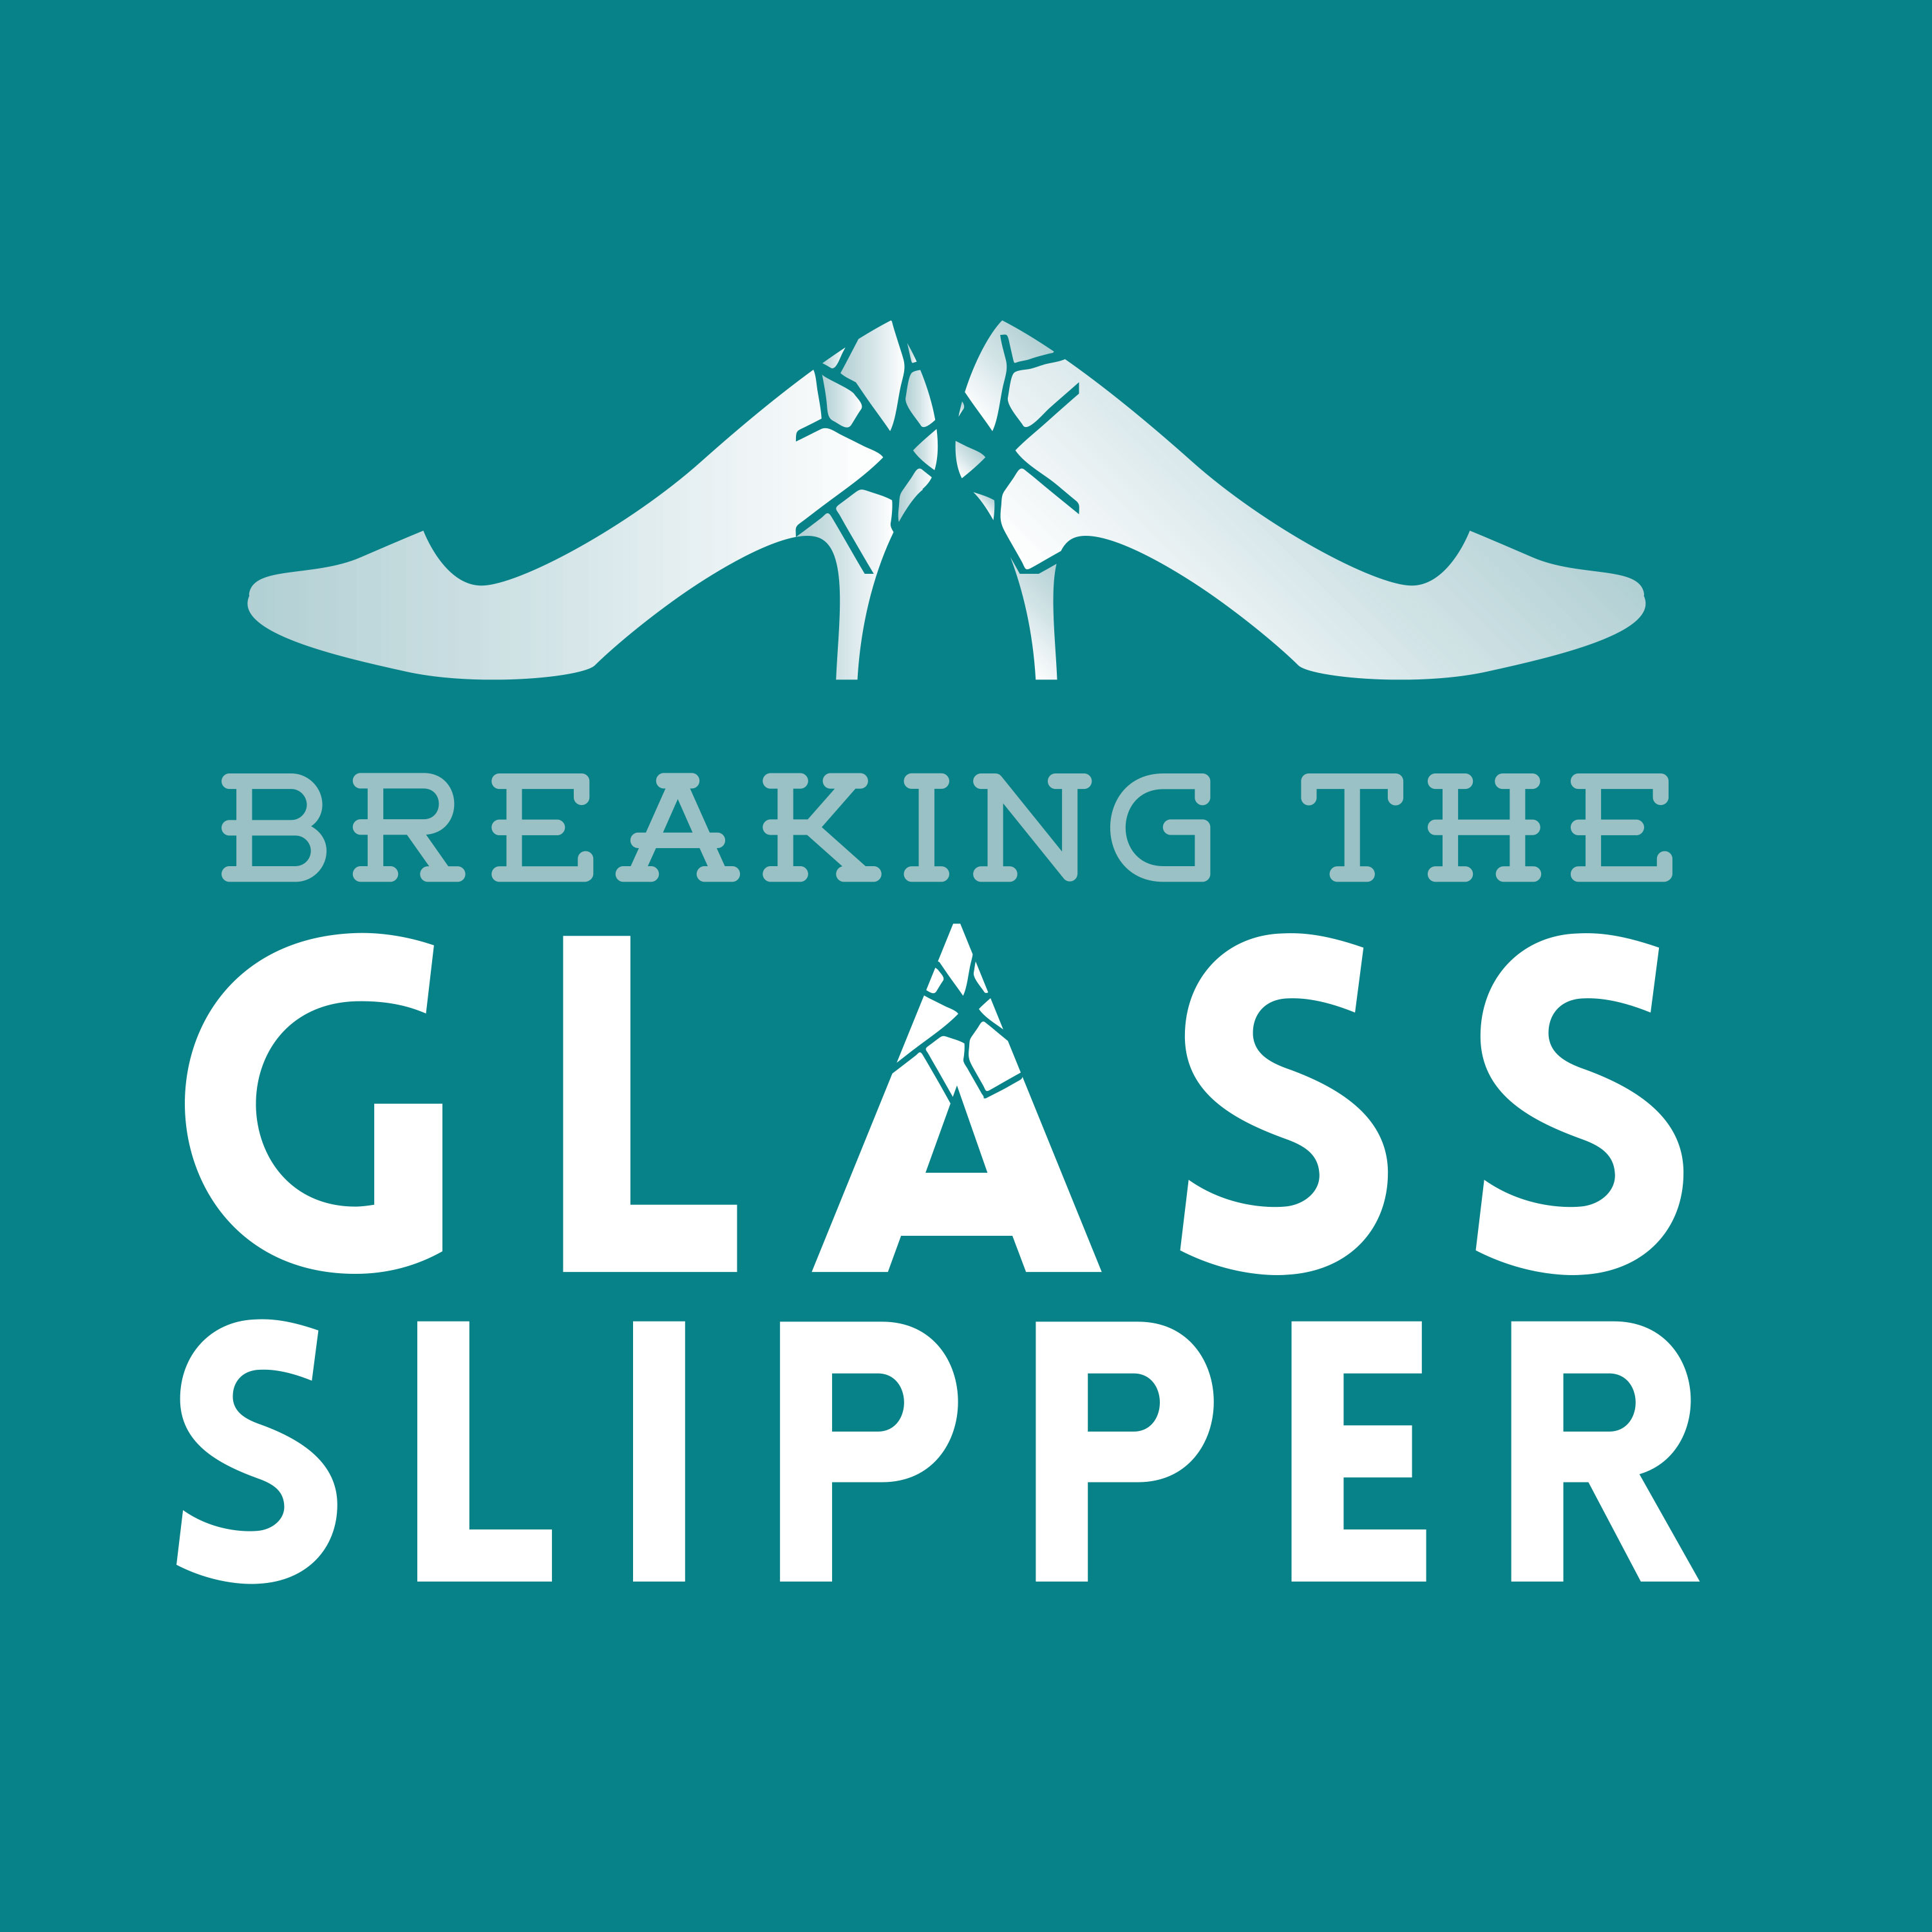 Breaking the Glass Slipper: Women in science fiction, fantasy, and horror